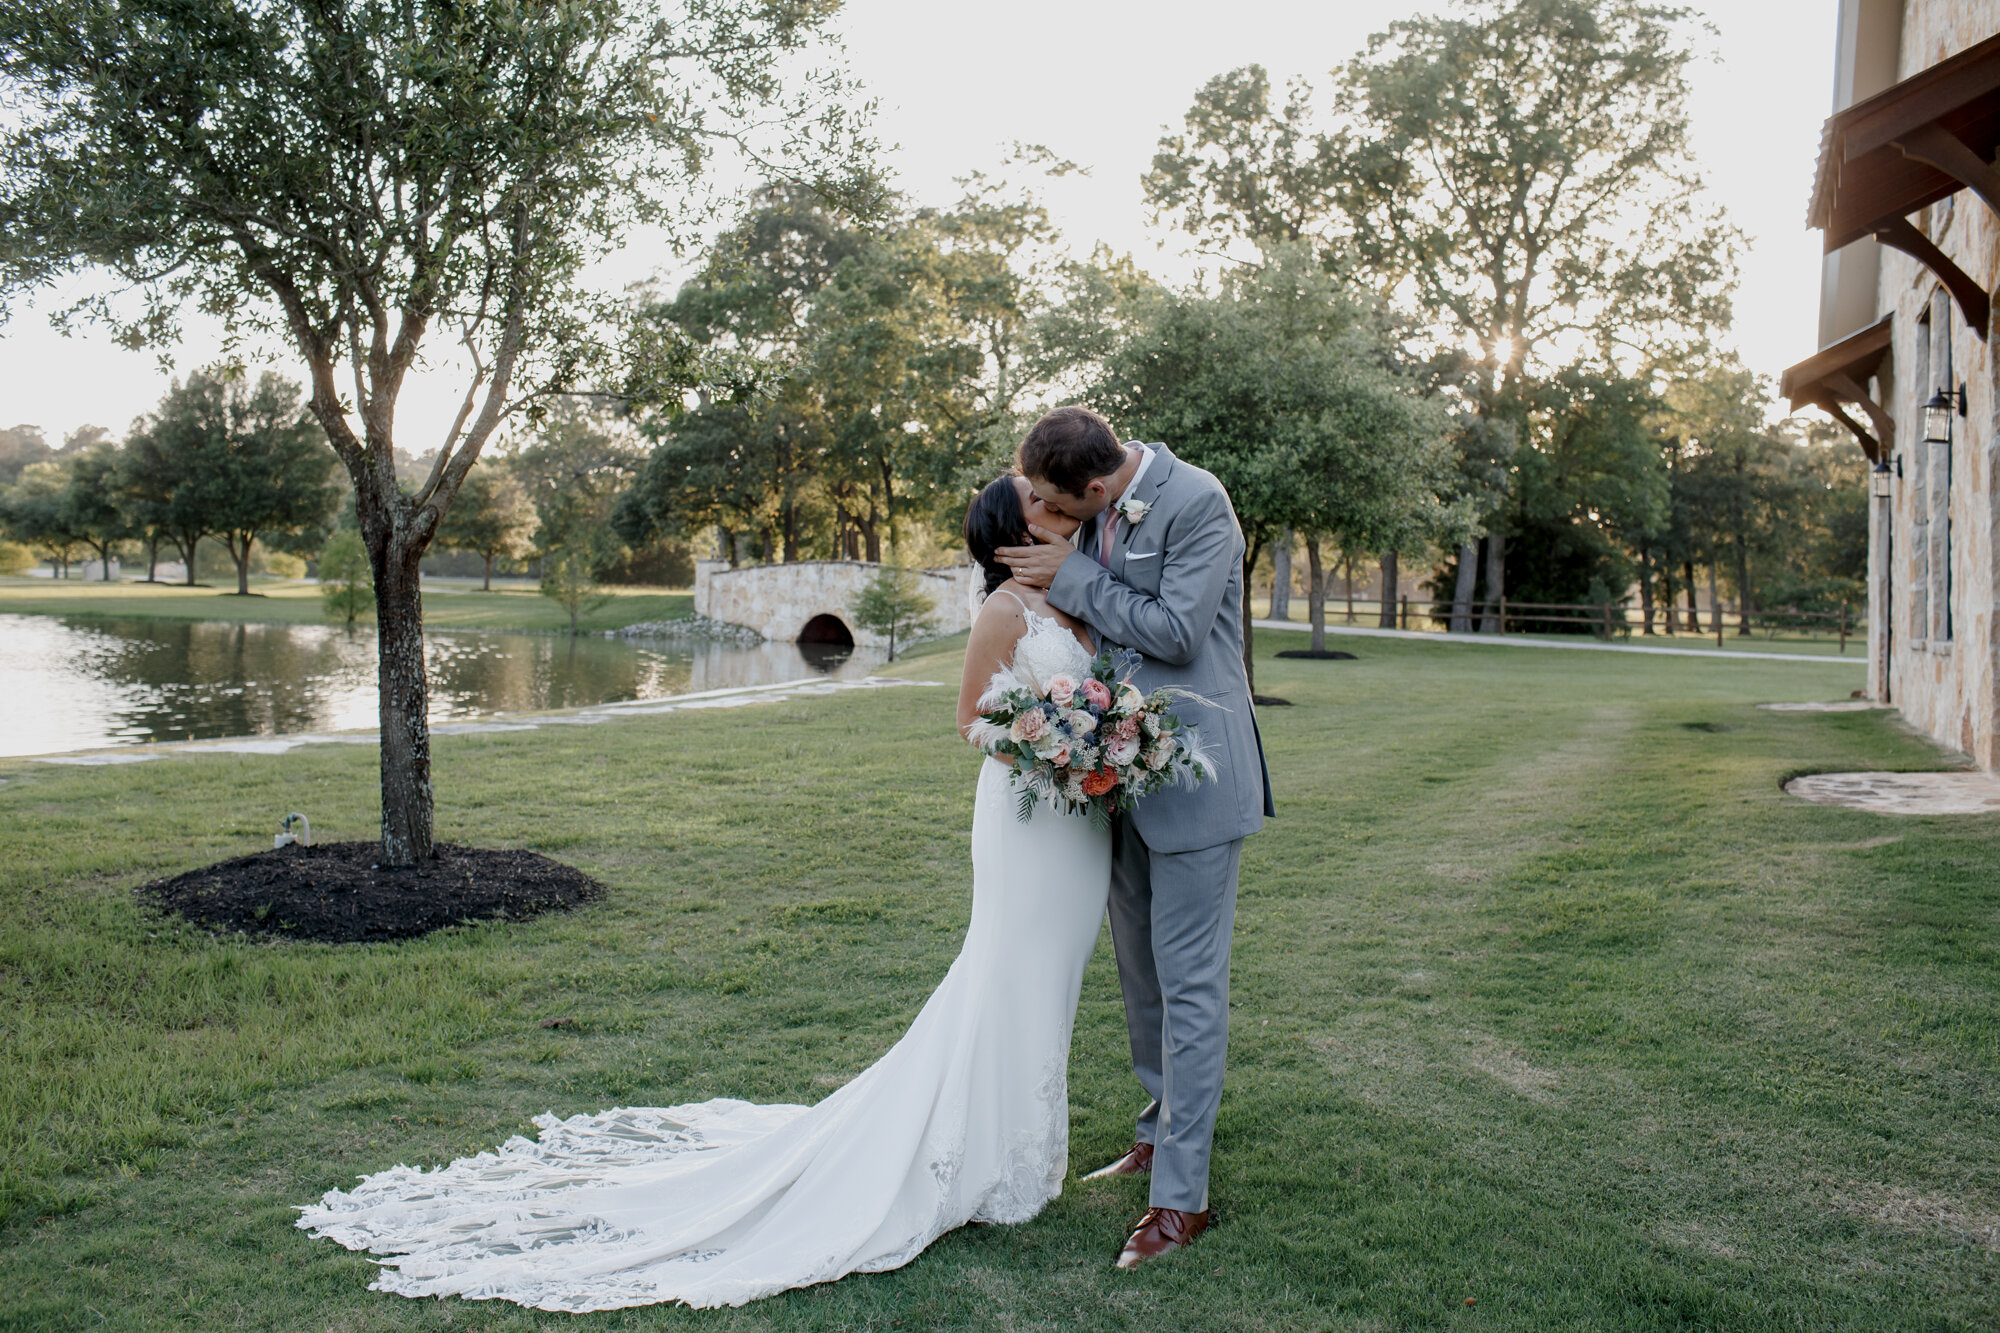 Bride and groom kissing by the lake. Romantic Chic Country Wedding at Rustic Luxury Balmorhea Events&nbsp;Venue in Magnolia, TX